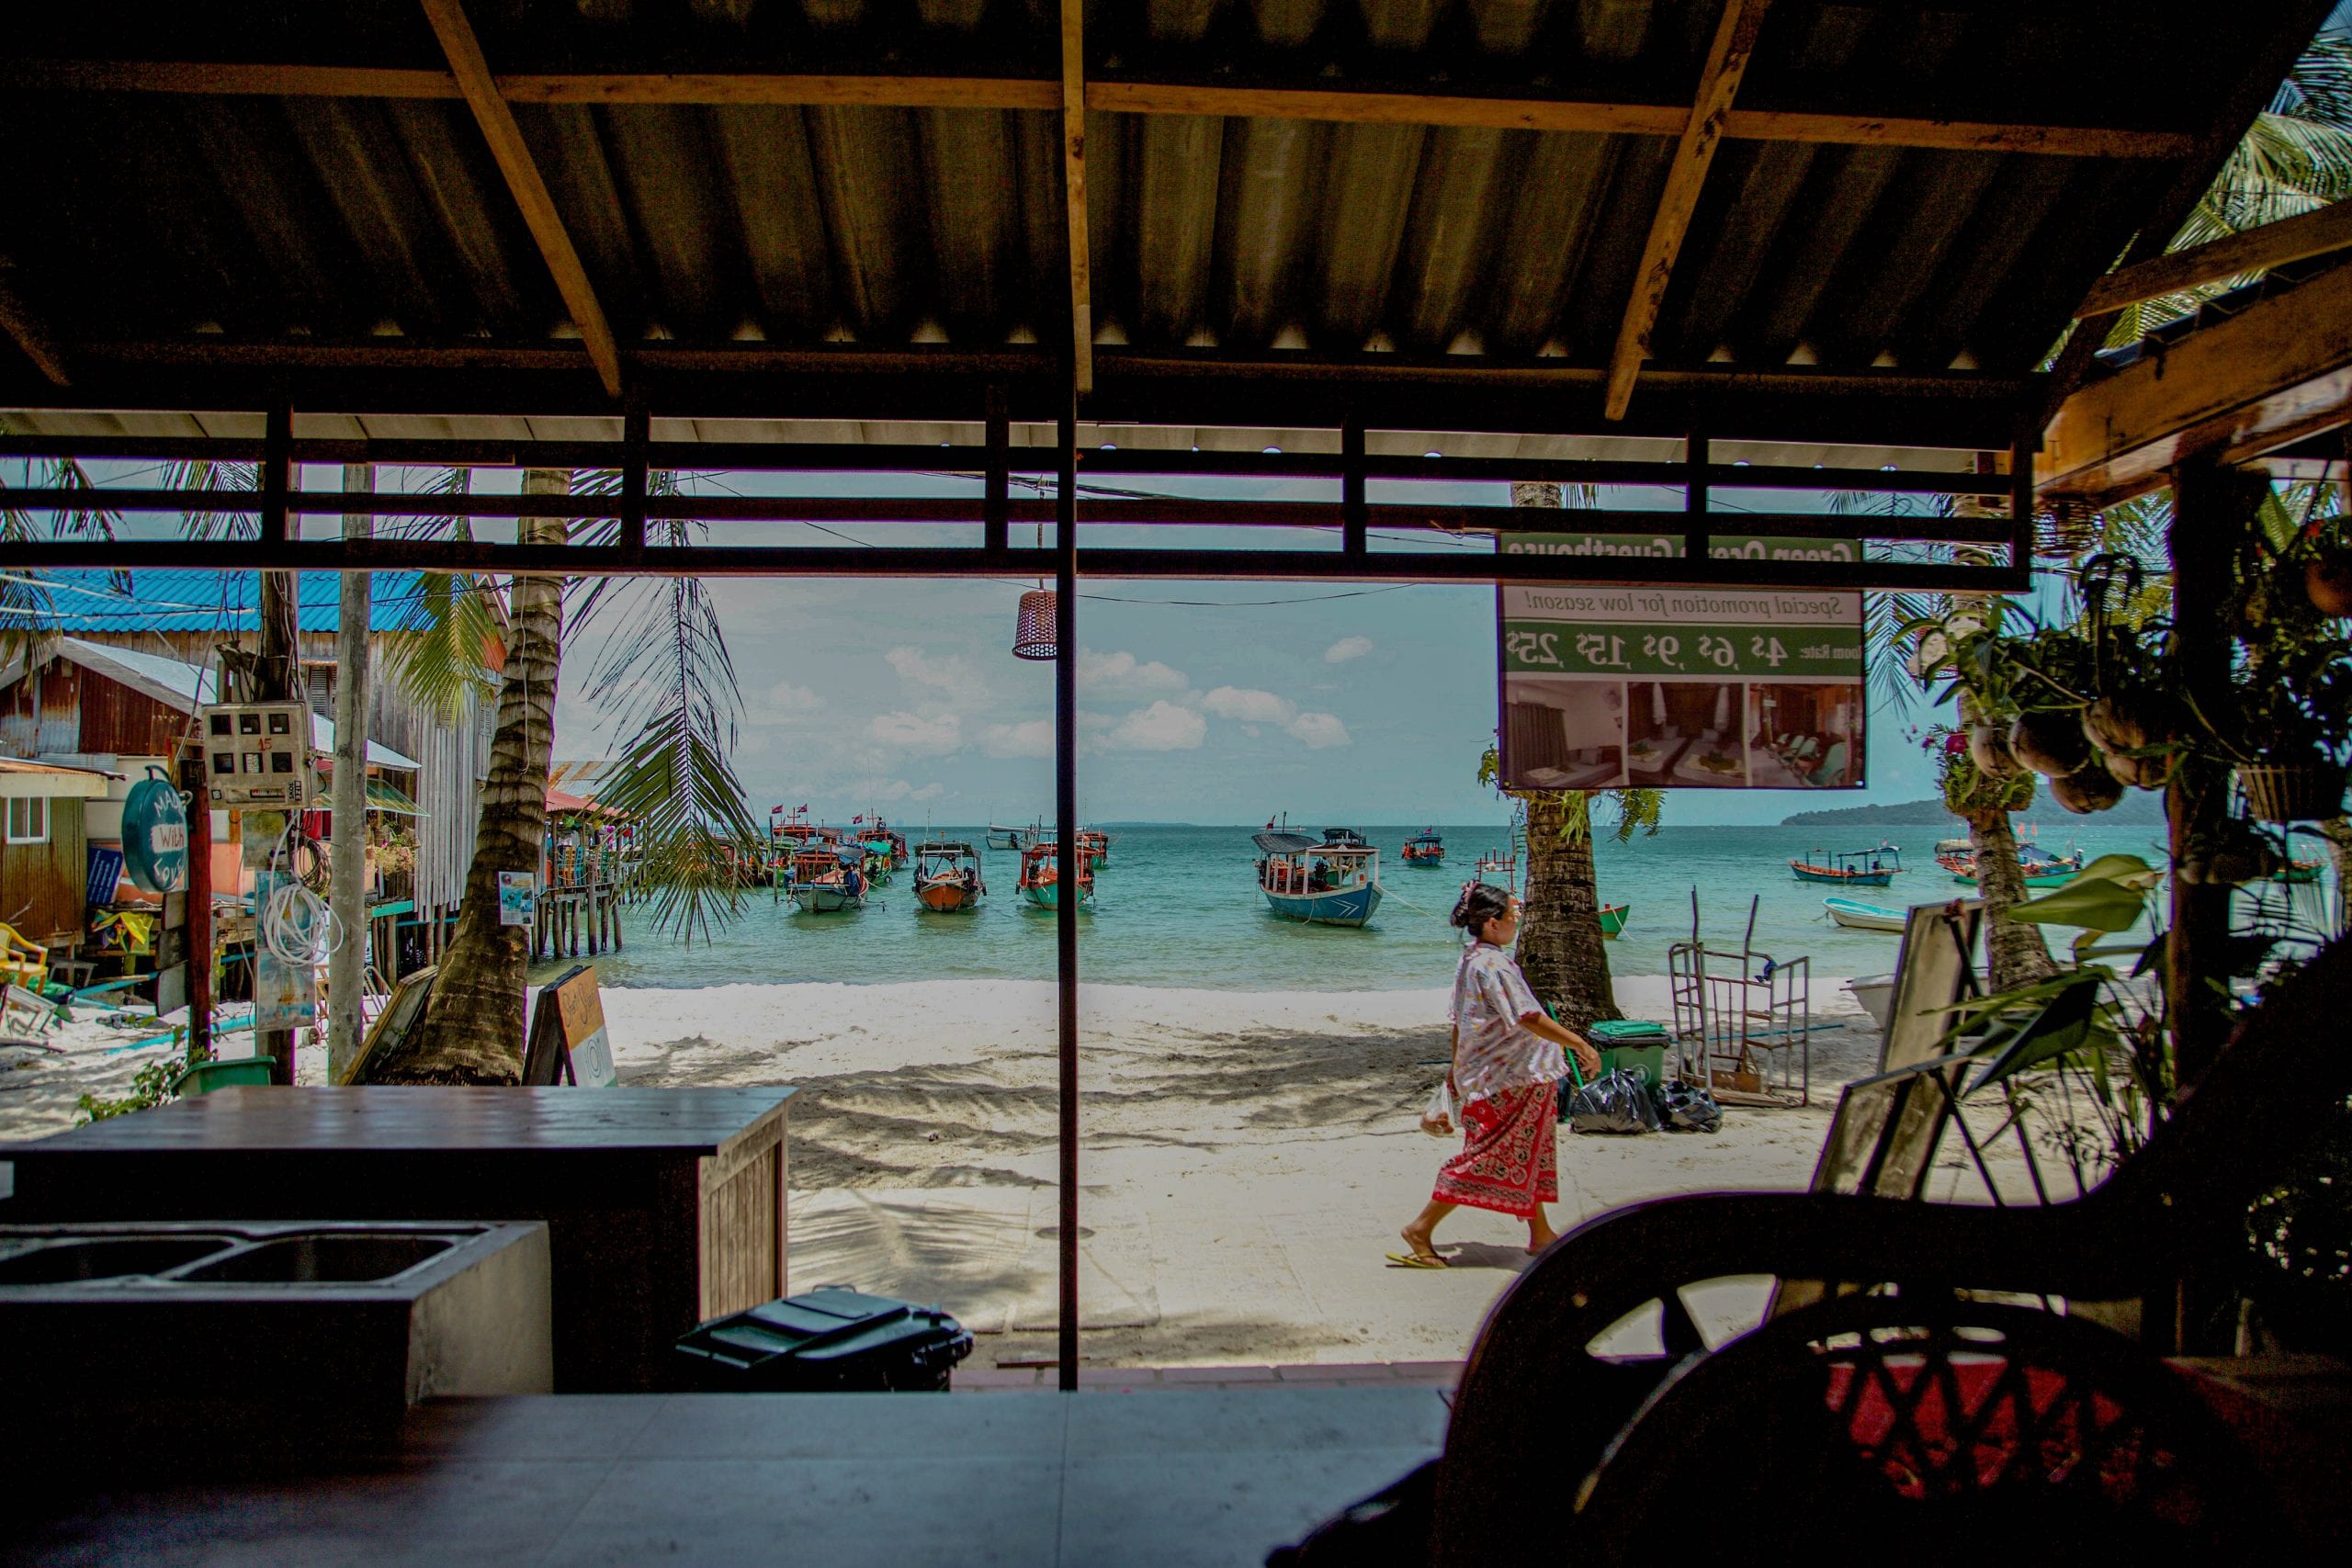 View of the beach inside a cafe on Koh Rong, Cambodia